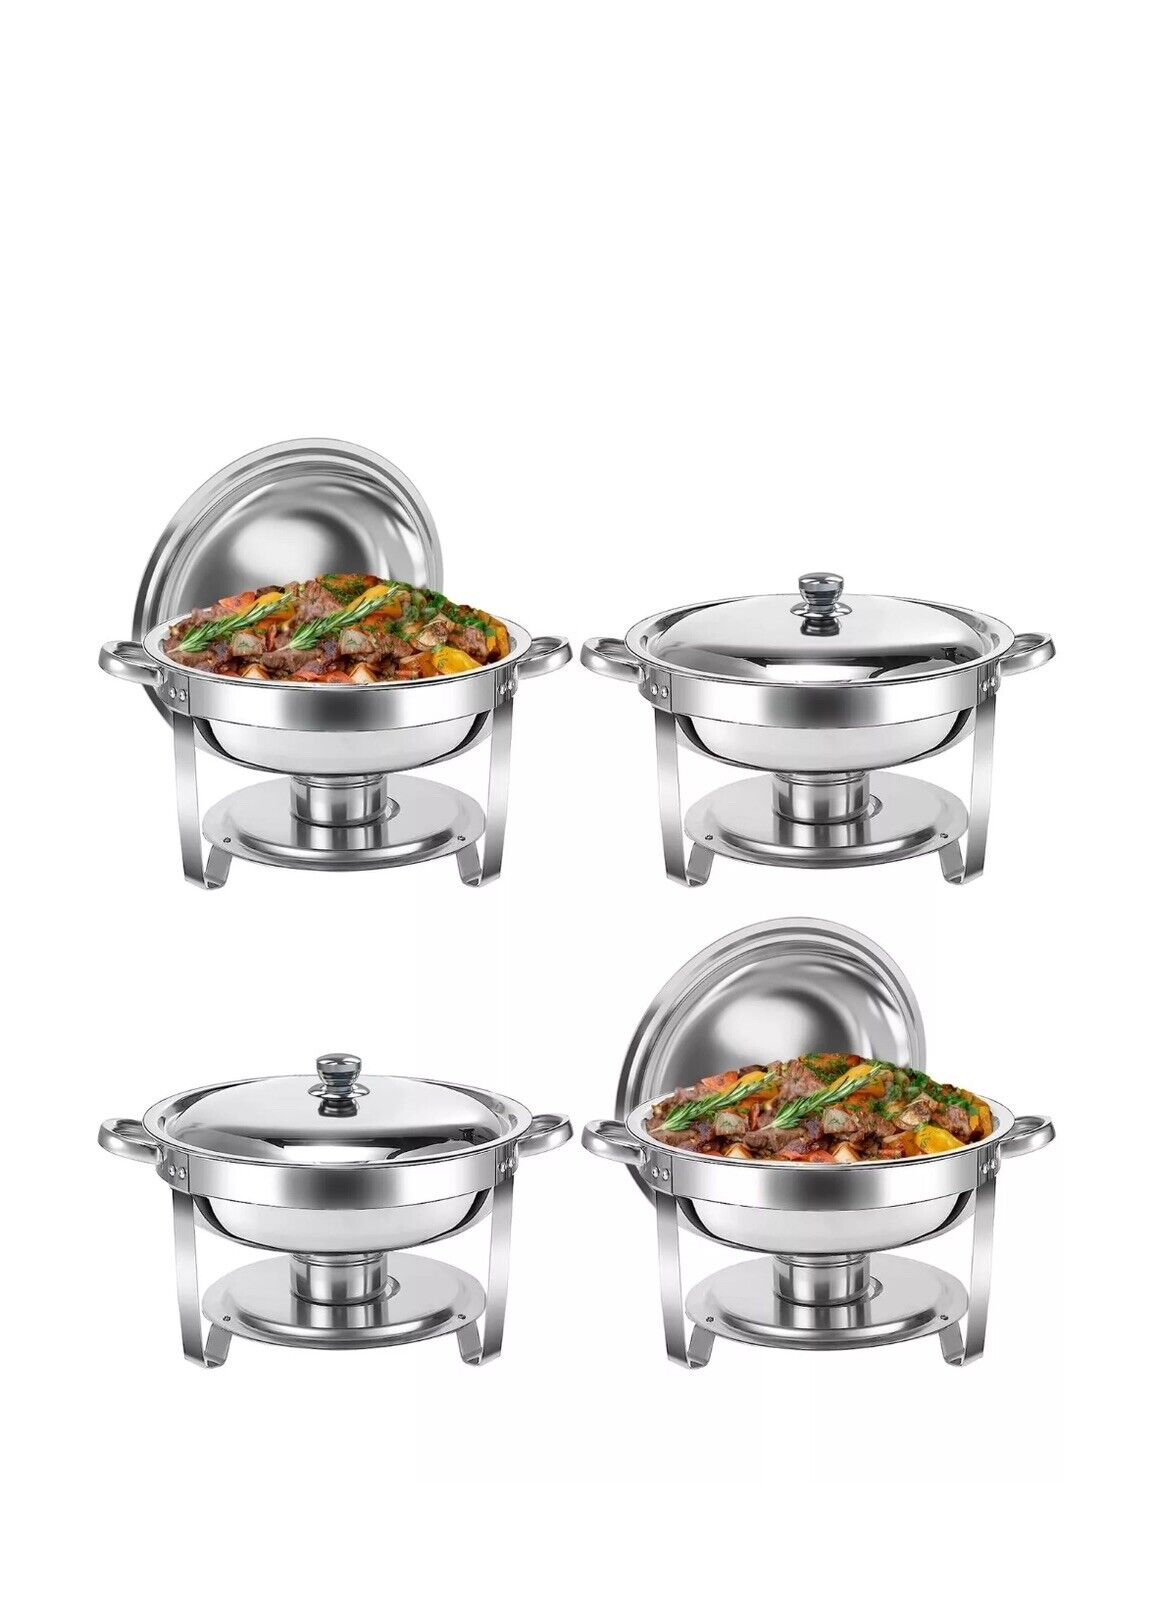 Chafing Dish Buffet Set 5 QT 4 Packs Stainless Steel Buffet Servers and Warme...